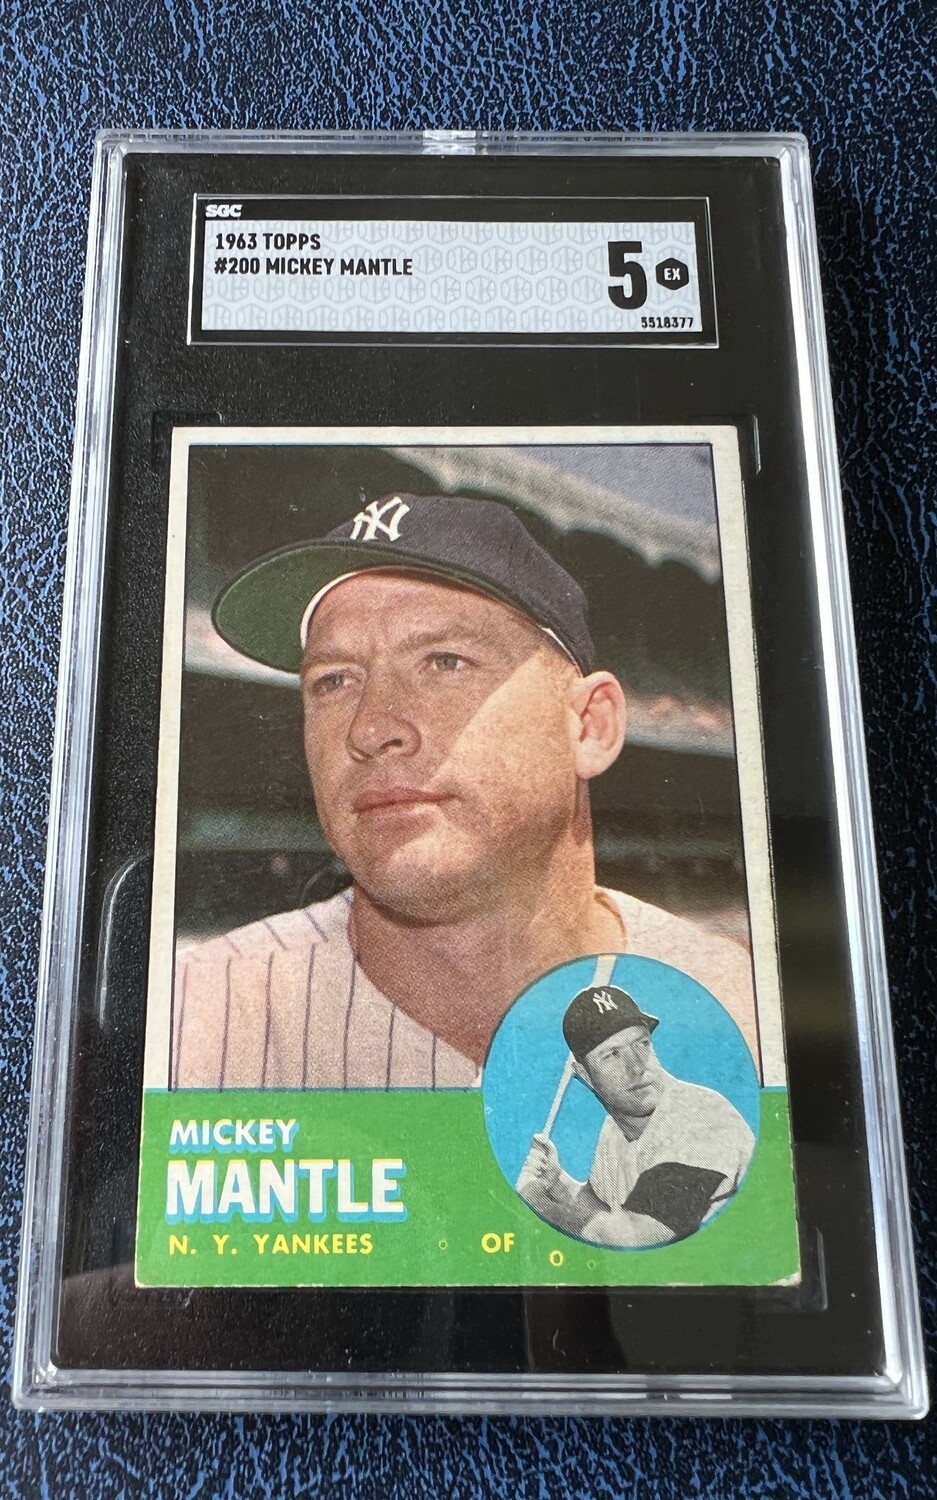 1963 Topps Mickey Mantle SGC graded 5